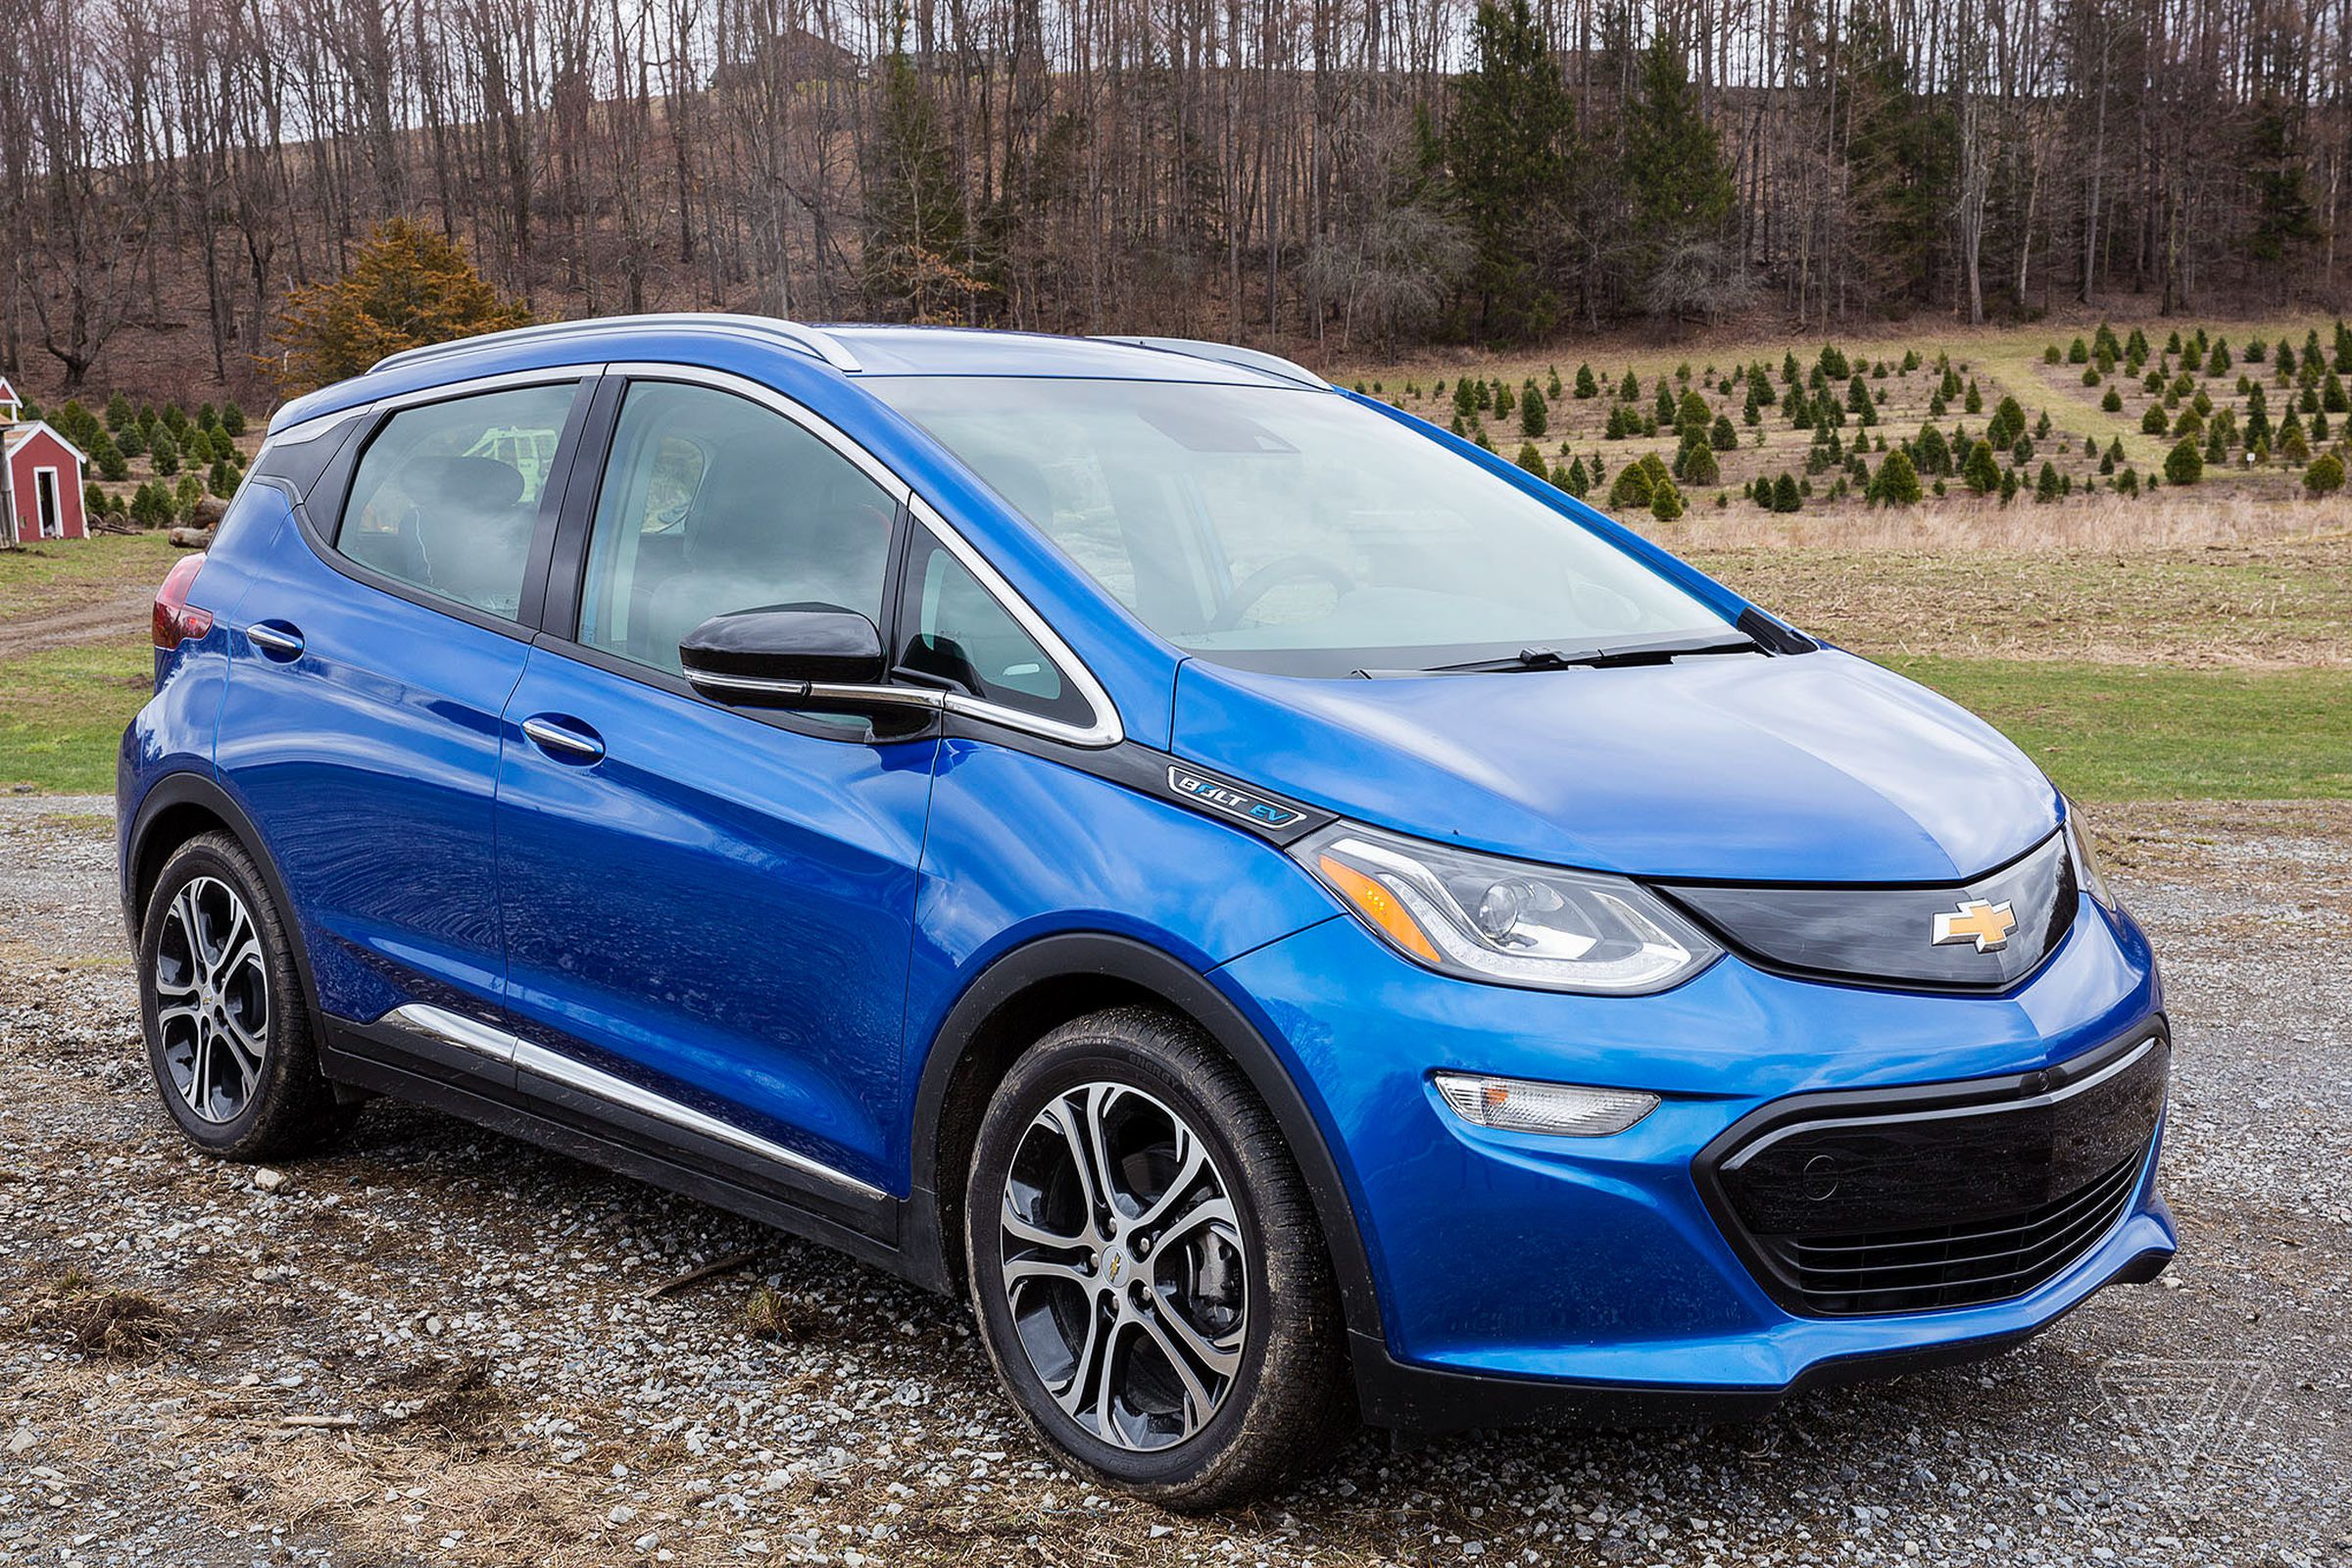 The Chevy Bolt is the most capable EV under $40,000 right now. 